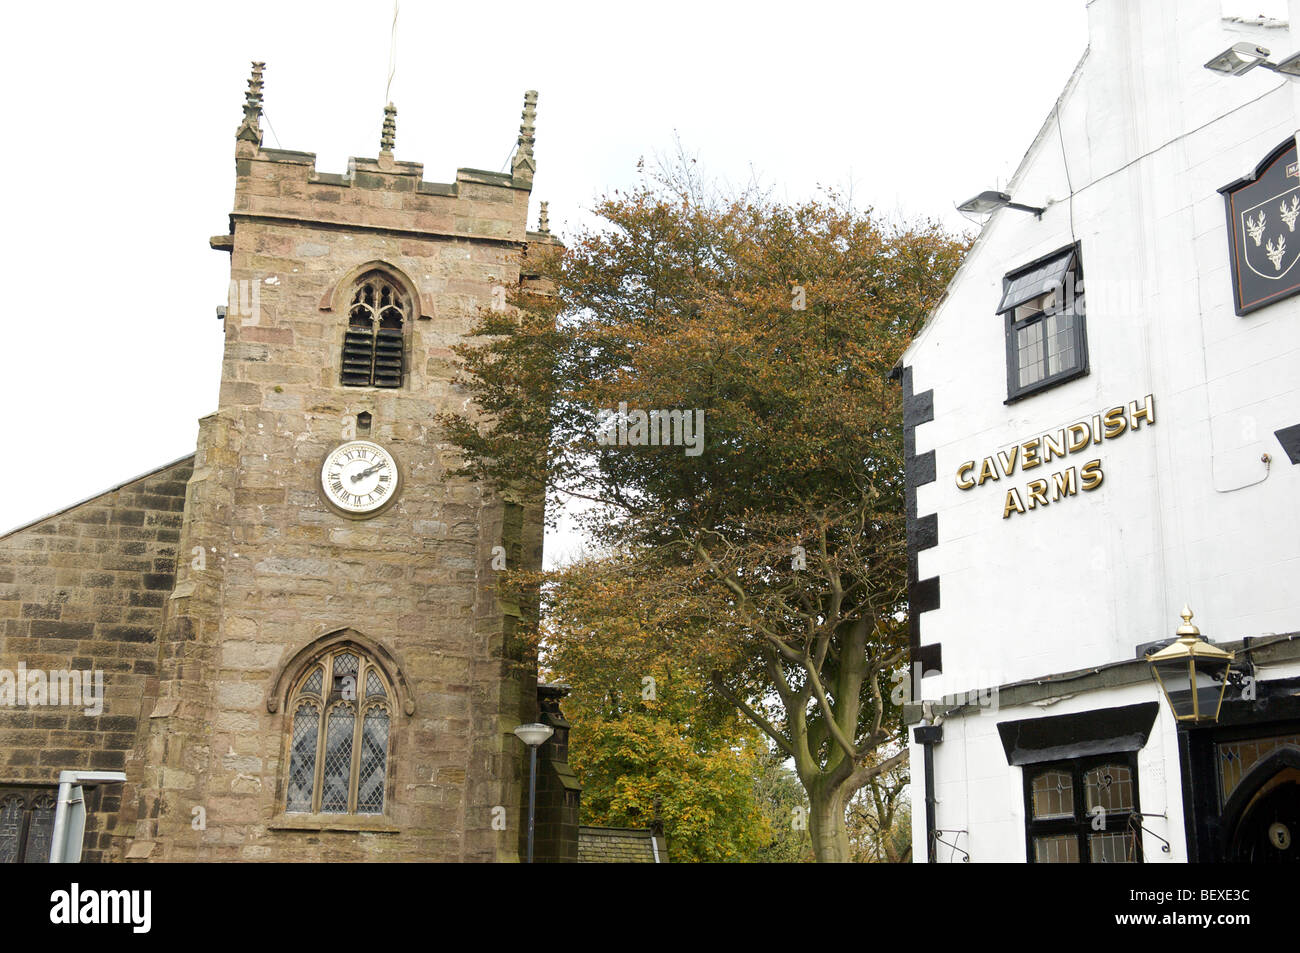 St James Church and local pub in Brindle village, Lancashire, England Stock Photo